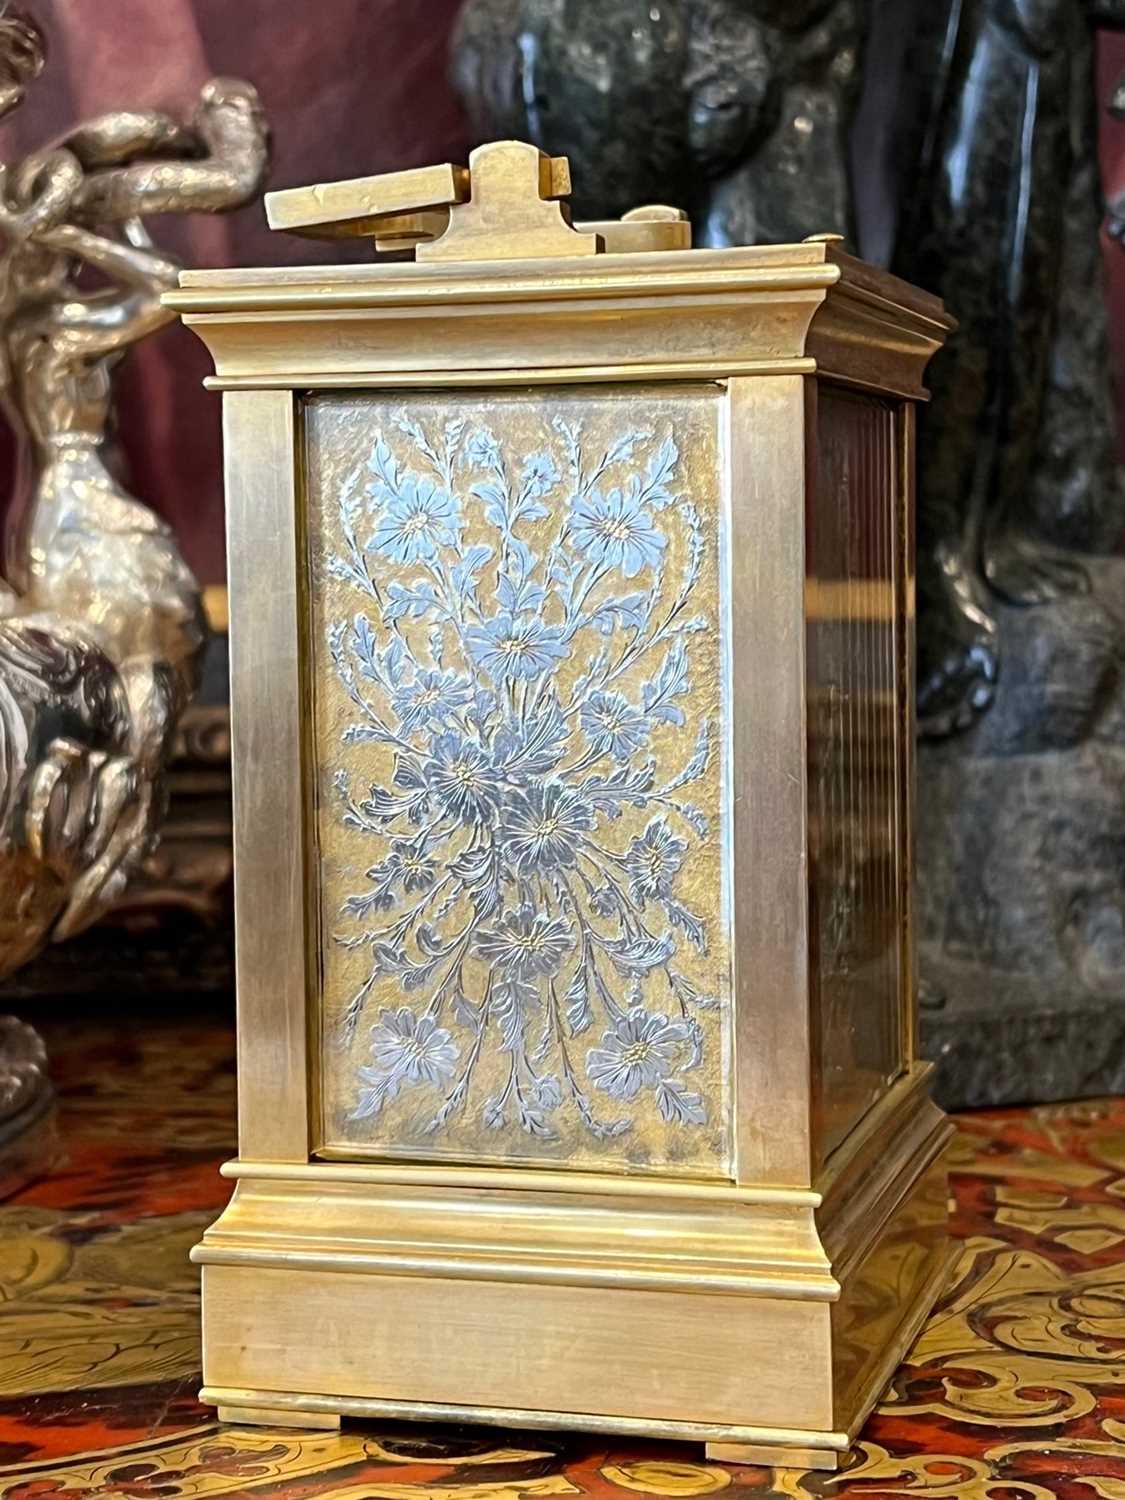 A FINE LATE 19TH CENTURY FRENCH CARRIAGE CLOCK WITH SIILVERED ENGRAVED PANELS - Image 5 of 6